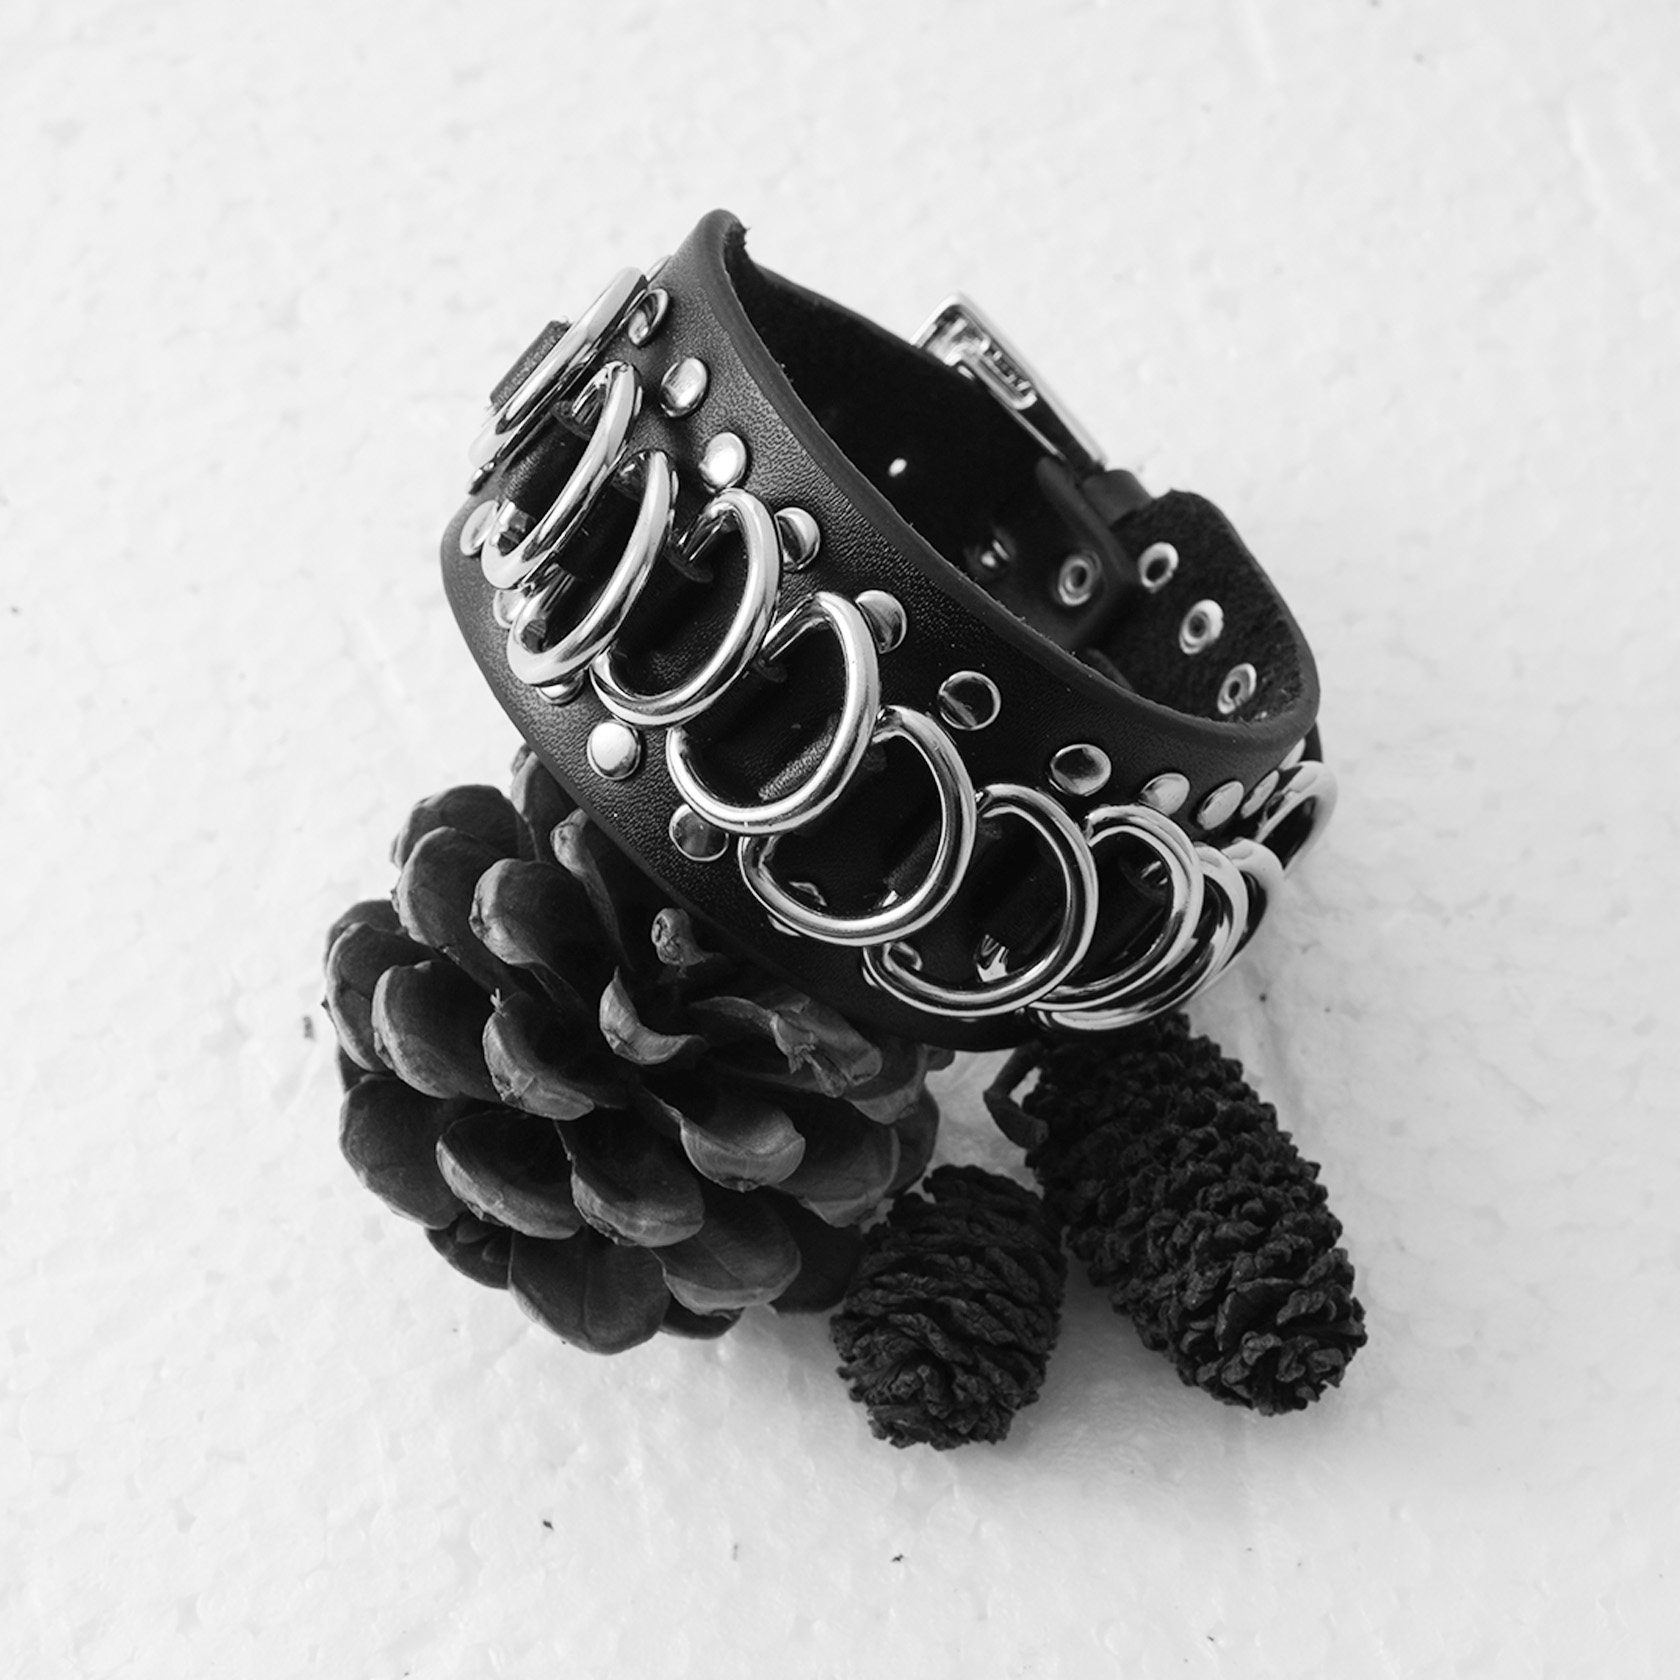 Rocker wide cuff bracelet faux leather punk goth style studded rivet buckle wristband with loops